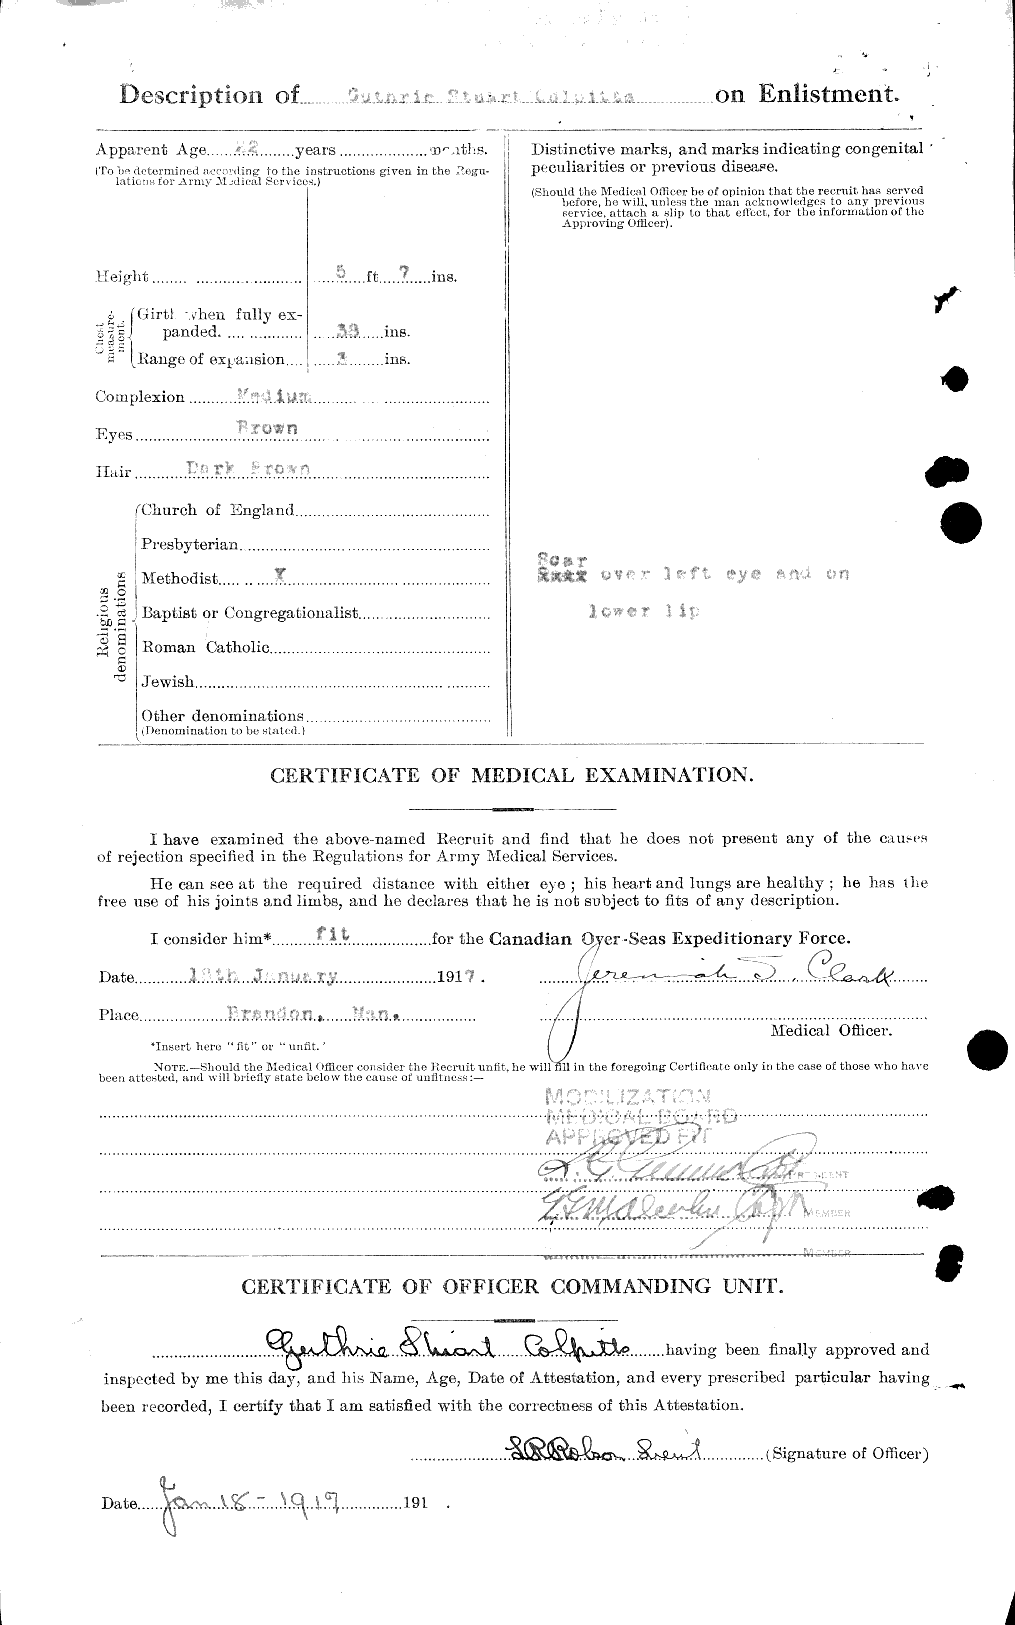 Personnel Records of the First World War - CEF 040815b